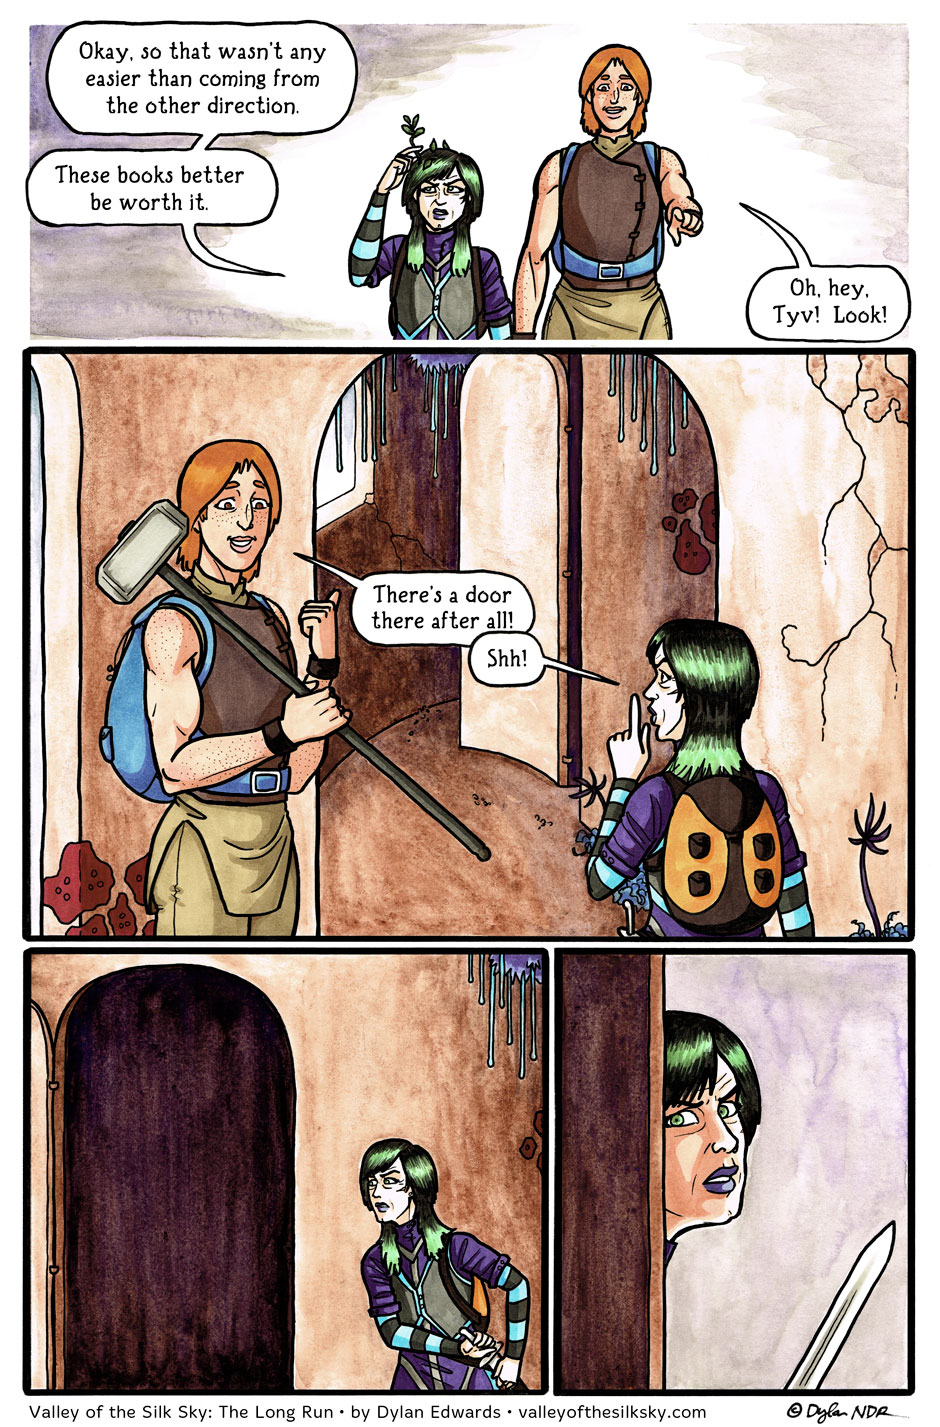 Valley of the Silk Sky queer YA SFF webcomic